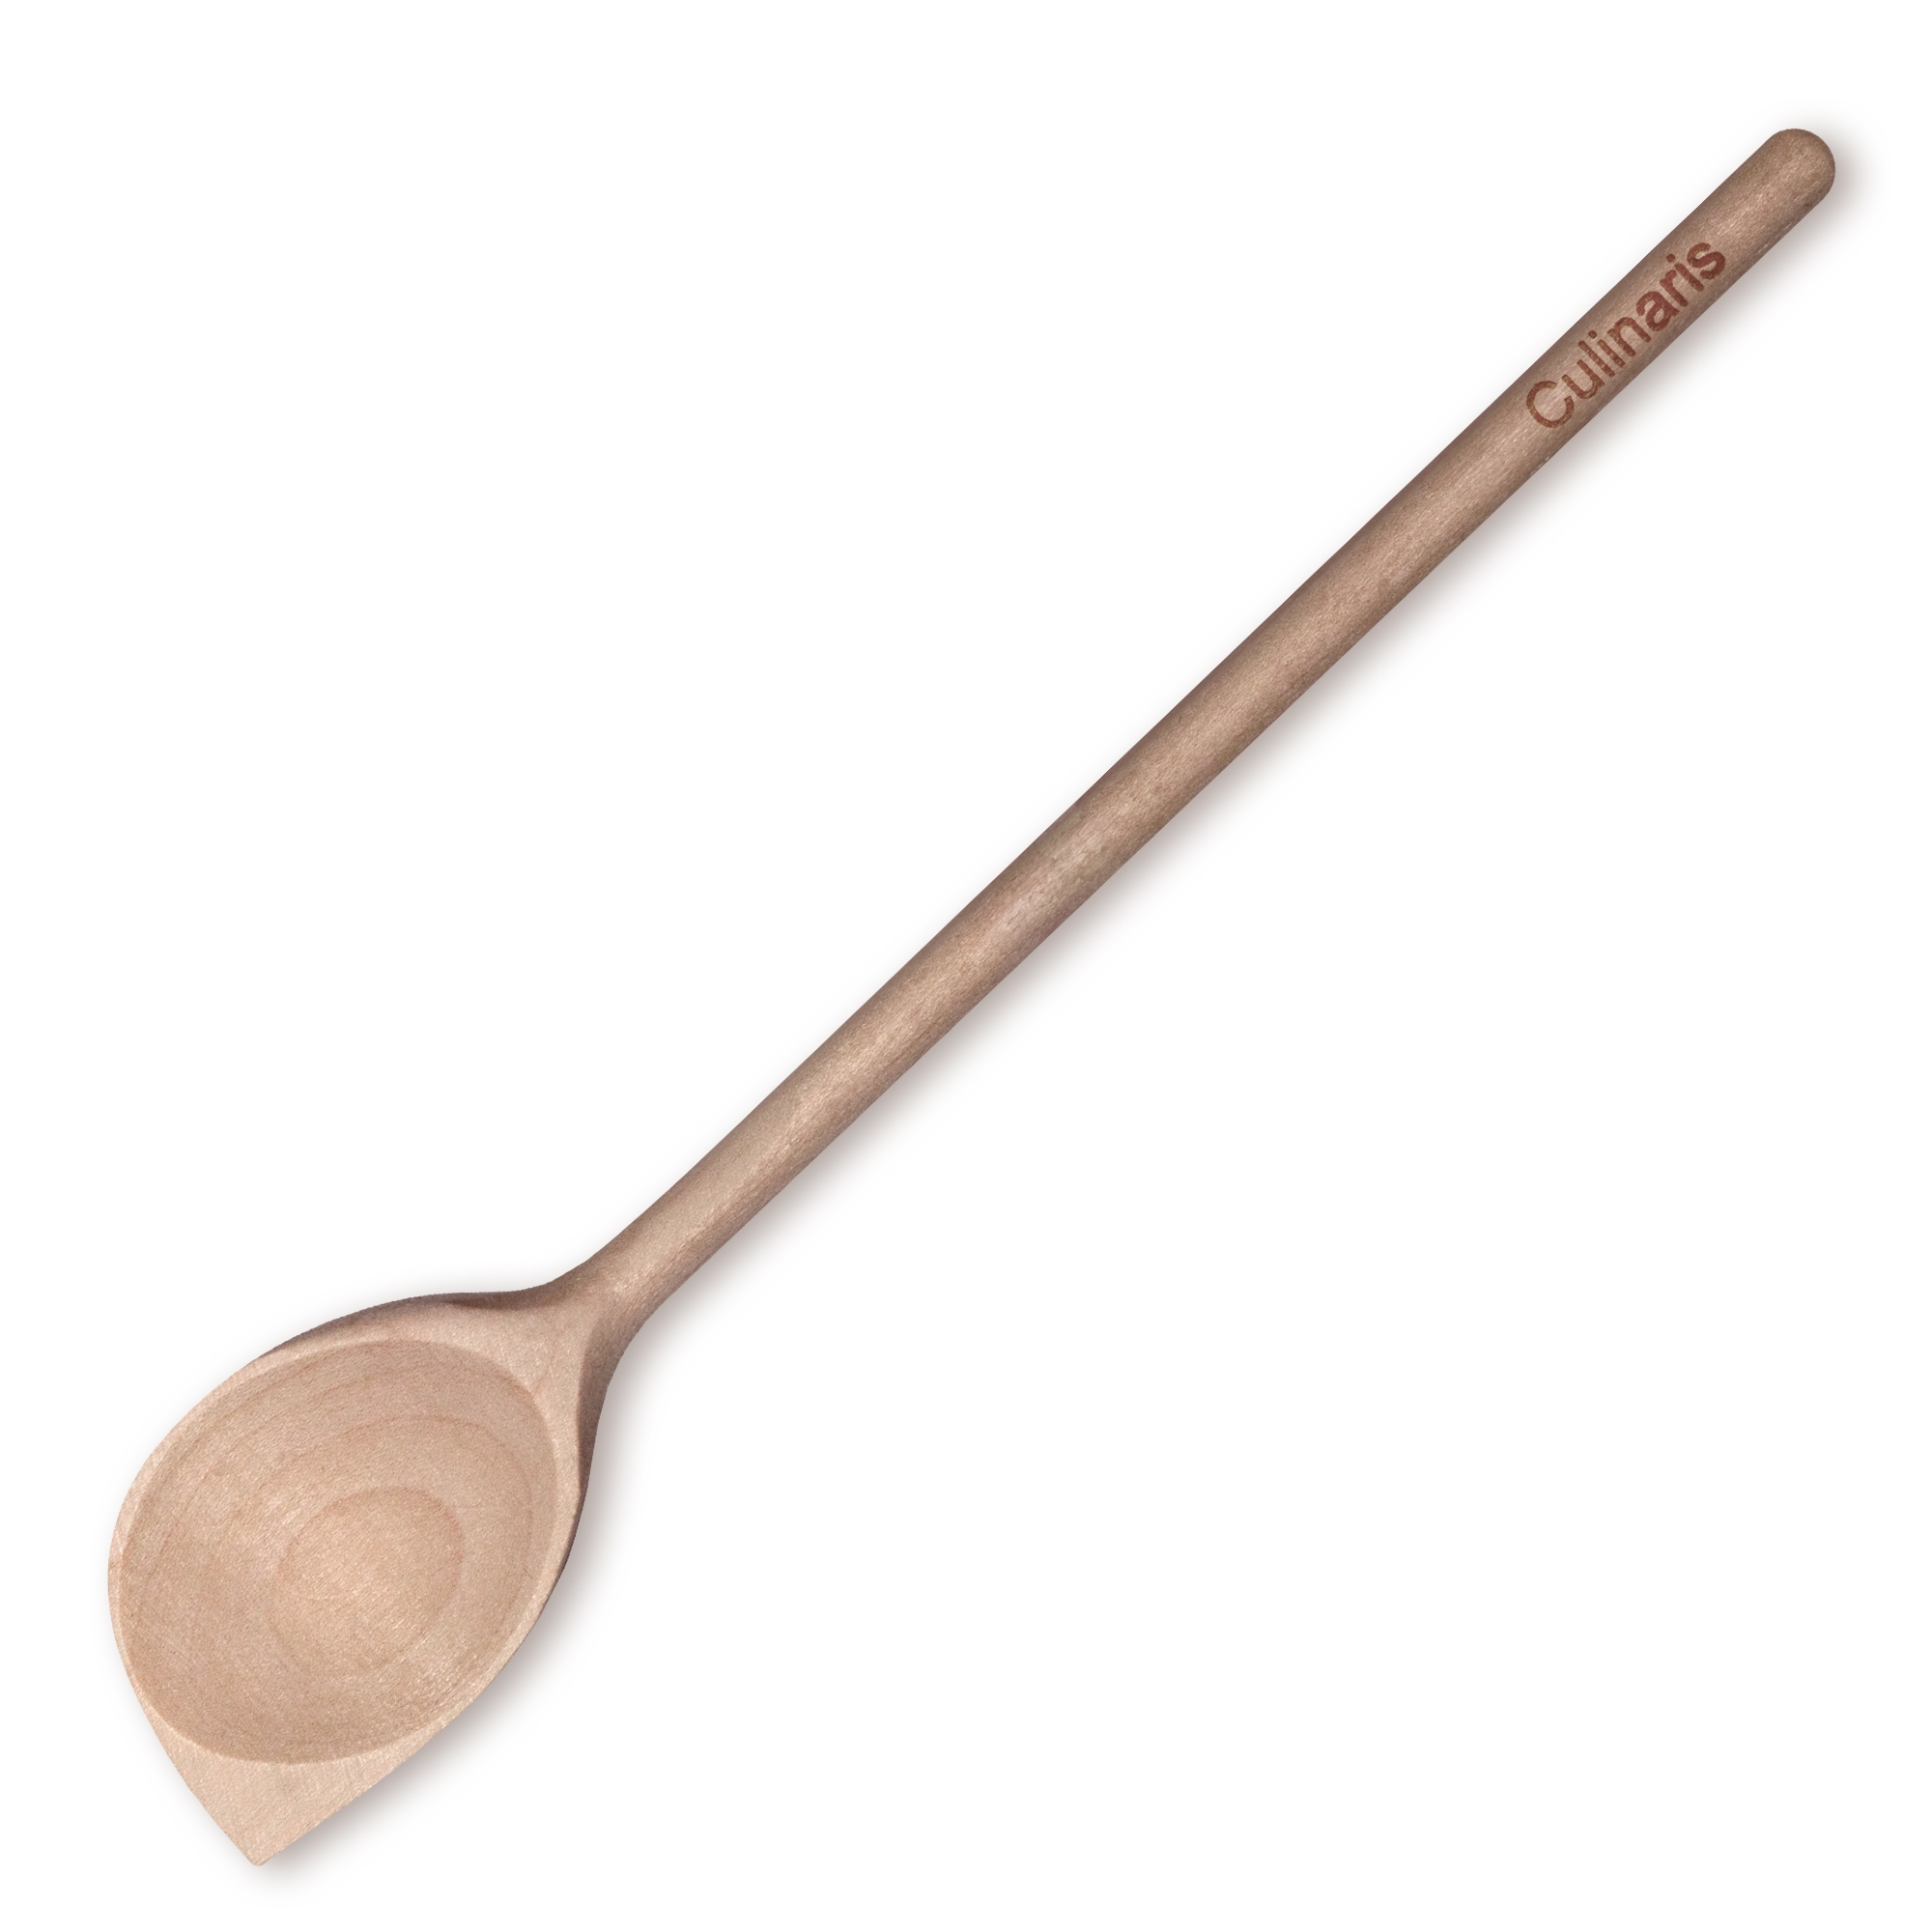 Culinaris - pointed cooking spoon - maple wood 25cm